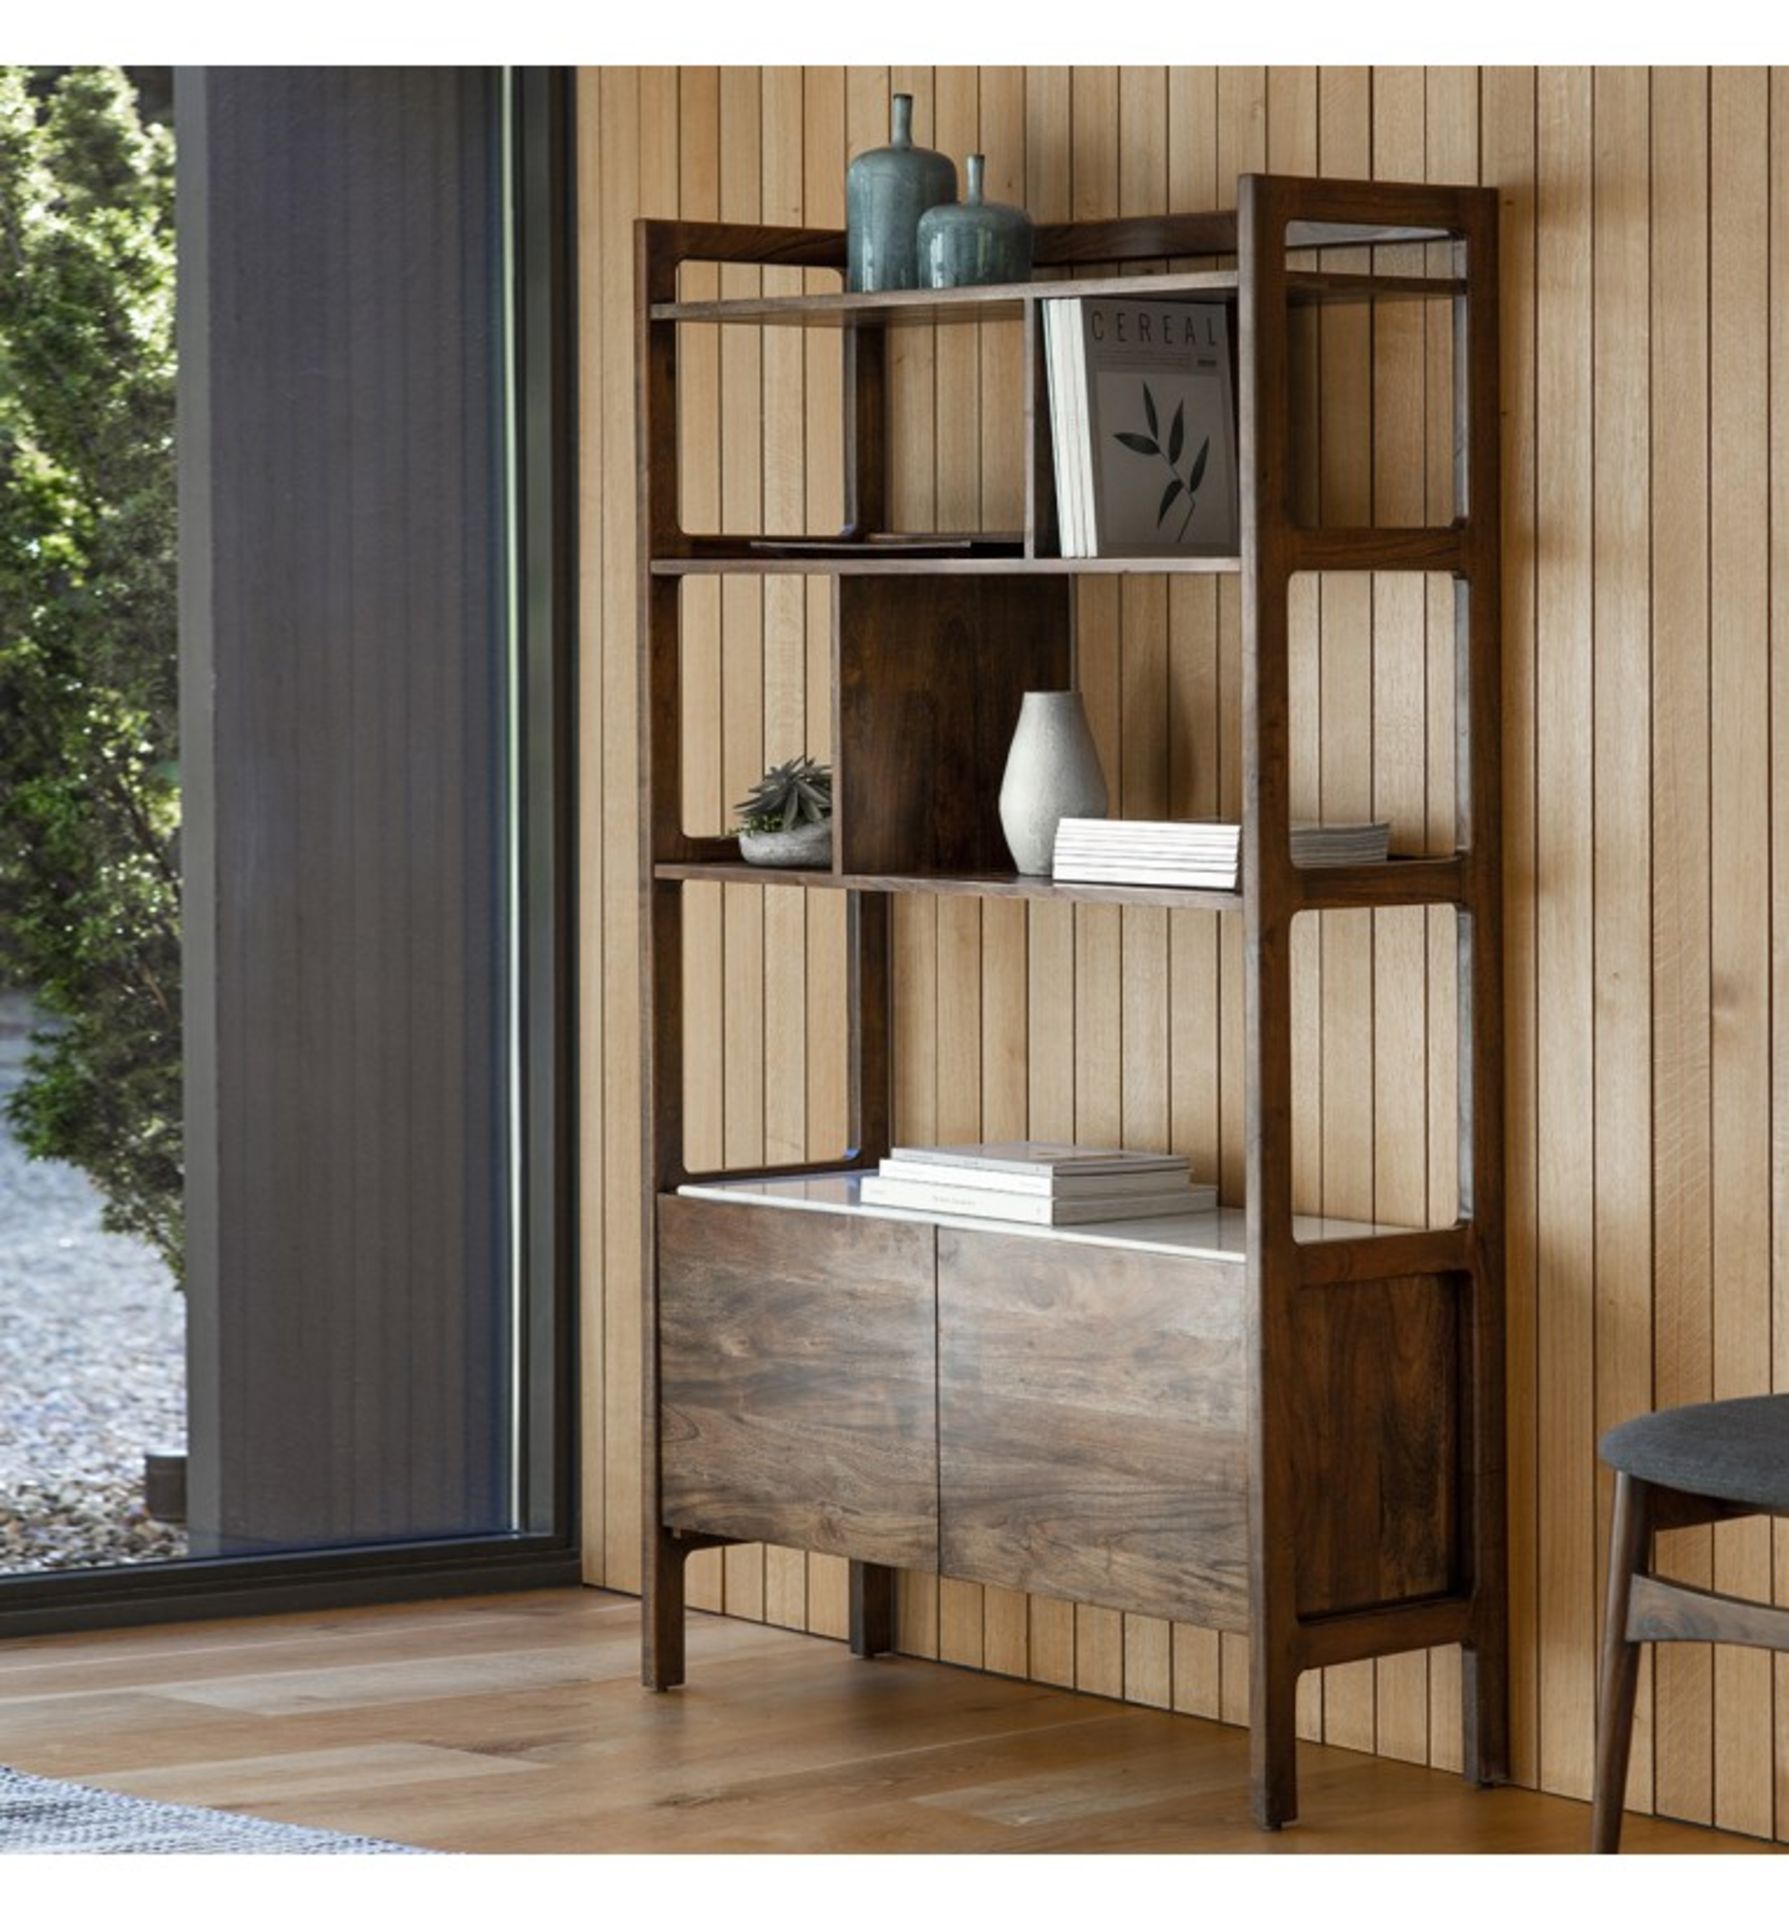 Barcelona Display Unit The Barcelona display cabinet is an elegant and practical display and storage